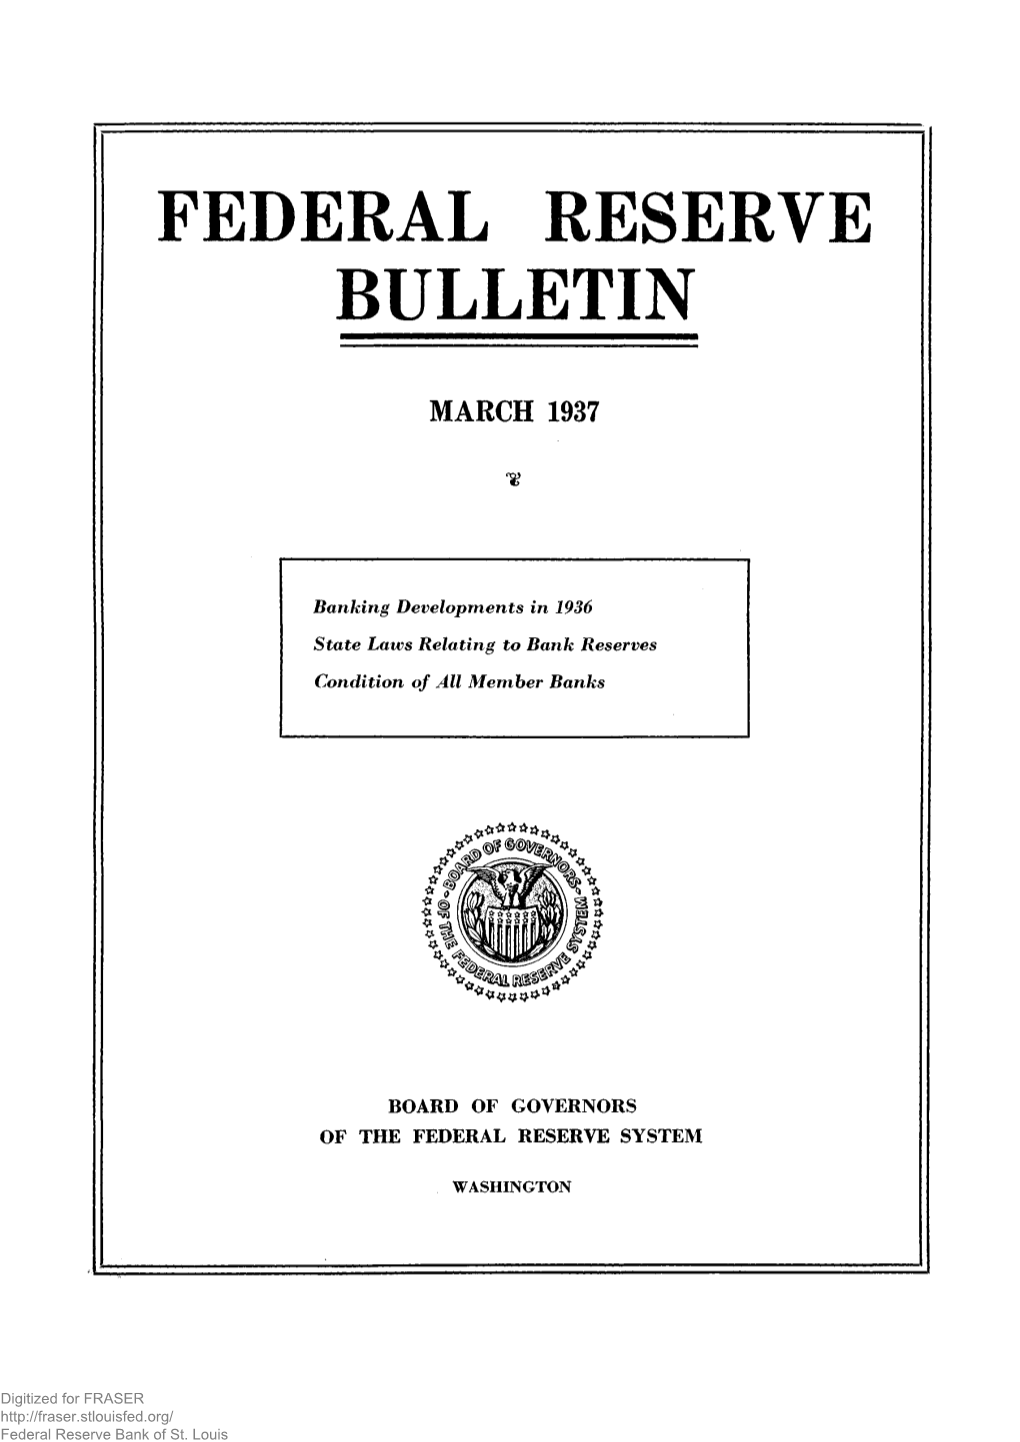 Federal Reserve Bulletin March 1937